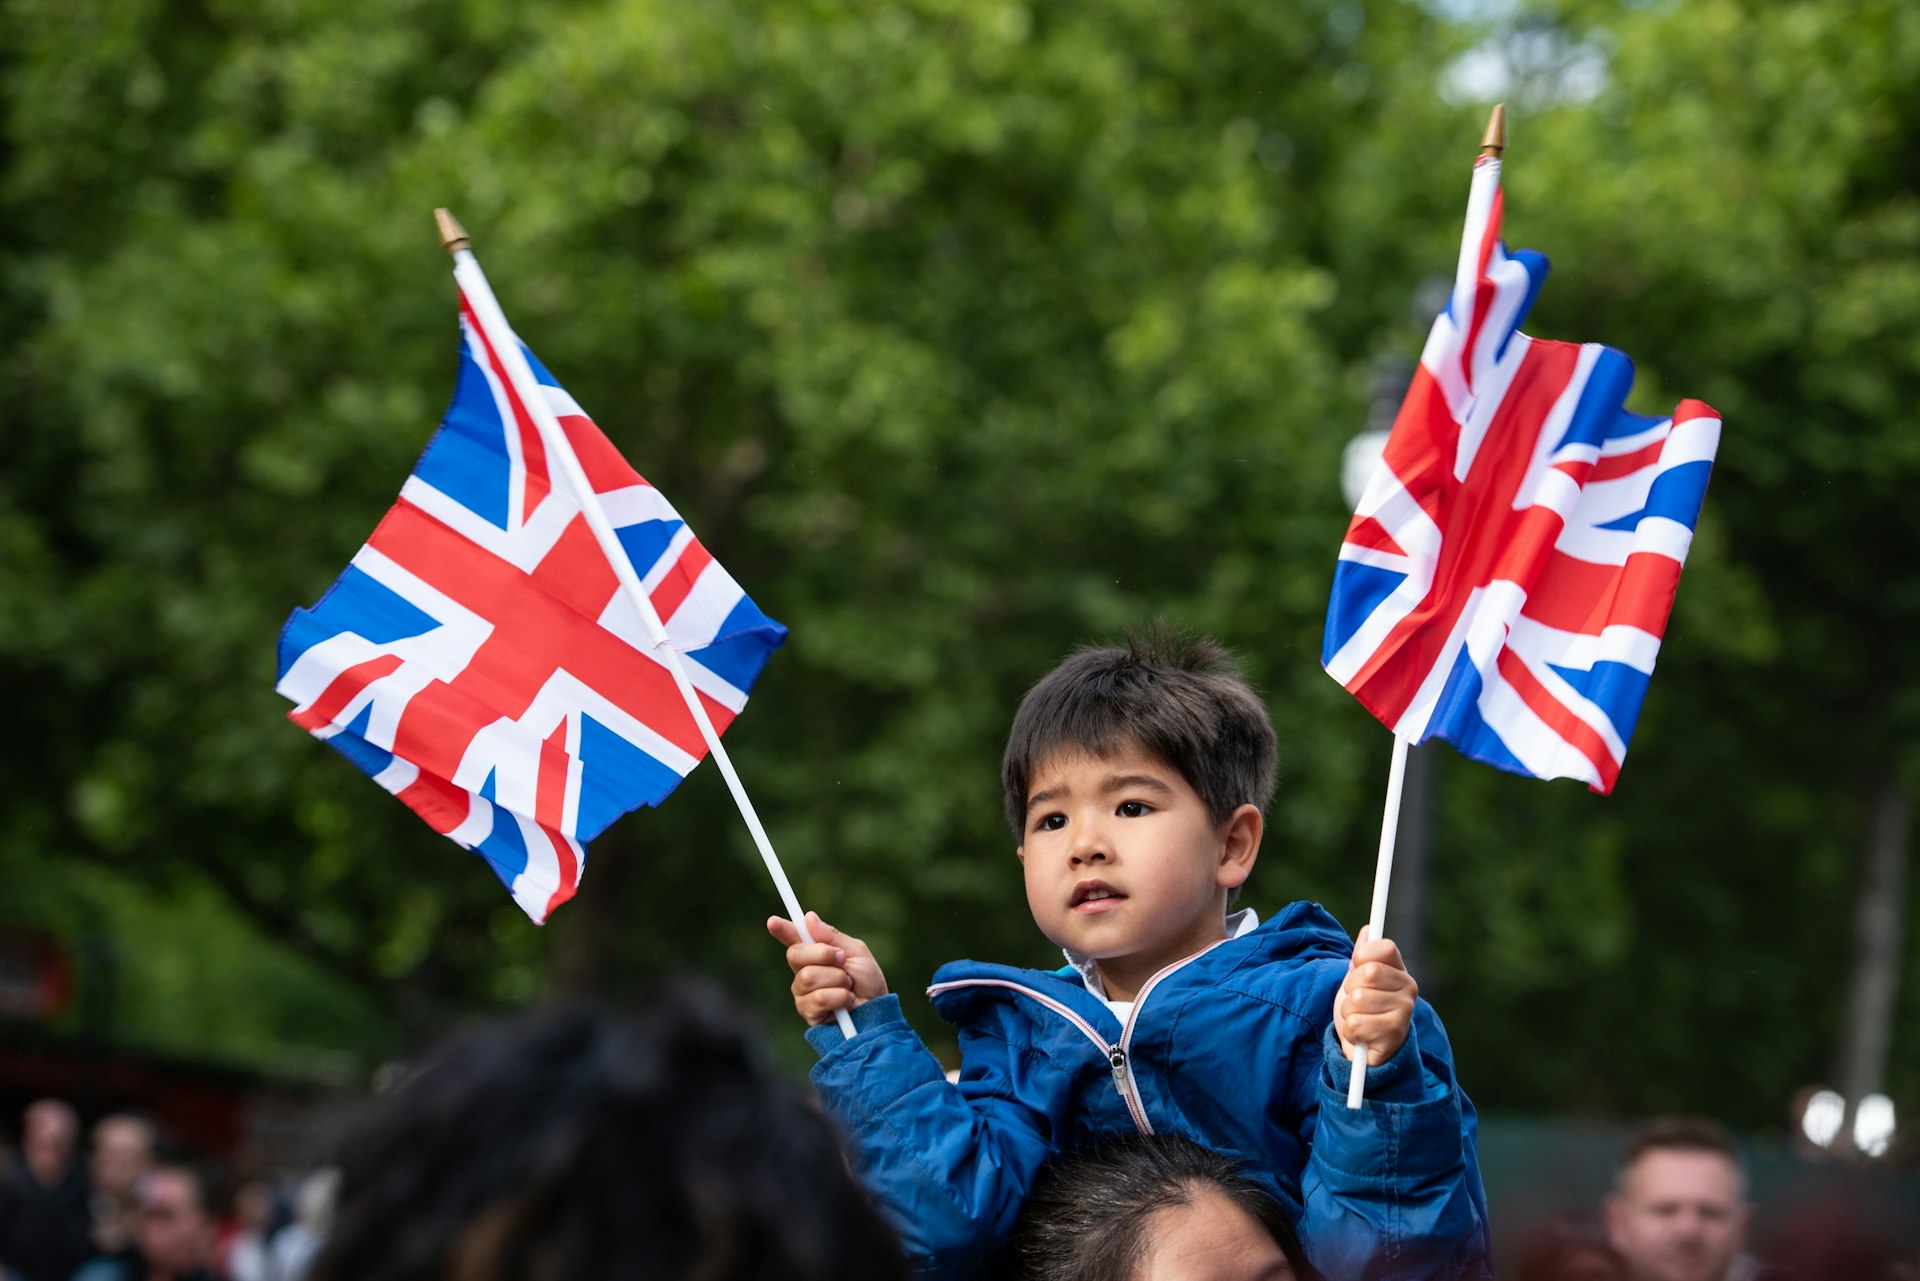 A boy sits on his father’s shoulders waving two Union Jack flags in London, England, United Kingdom